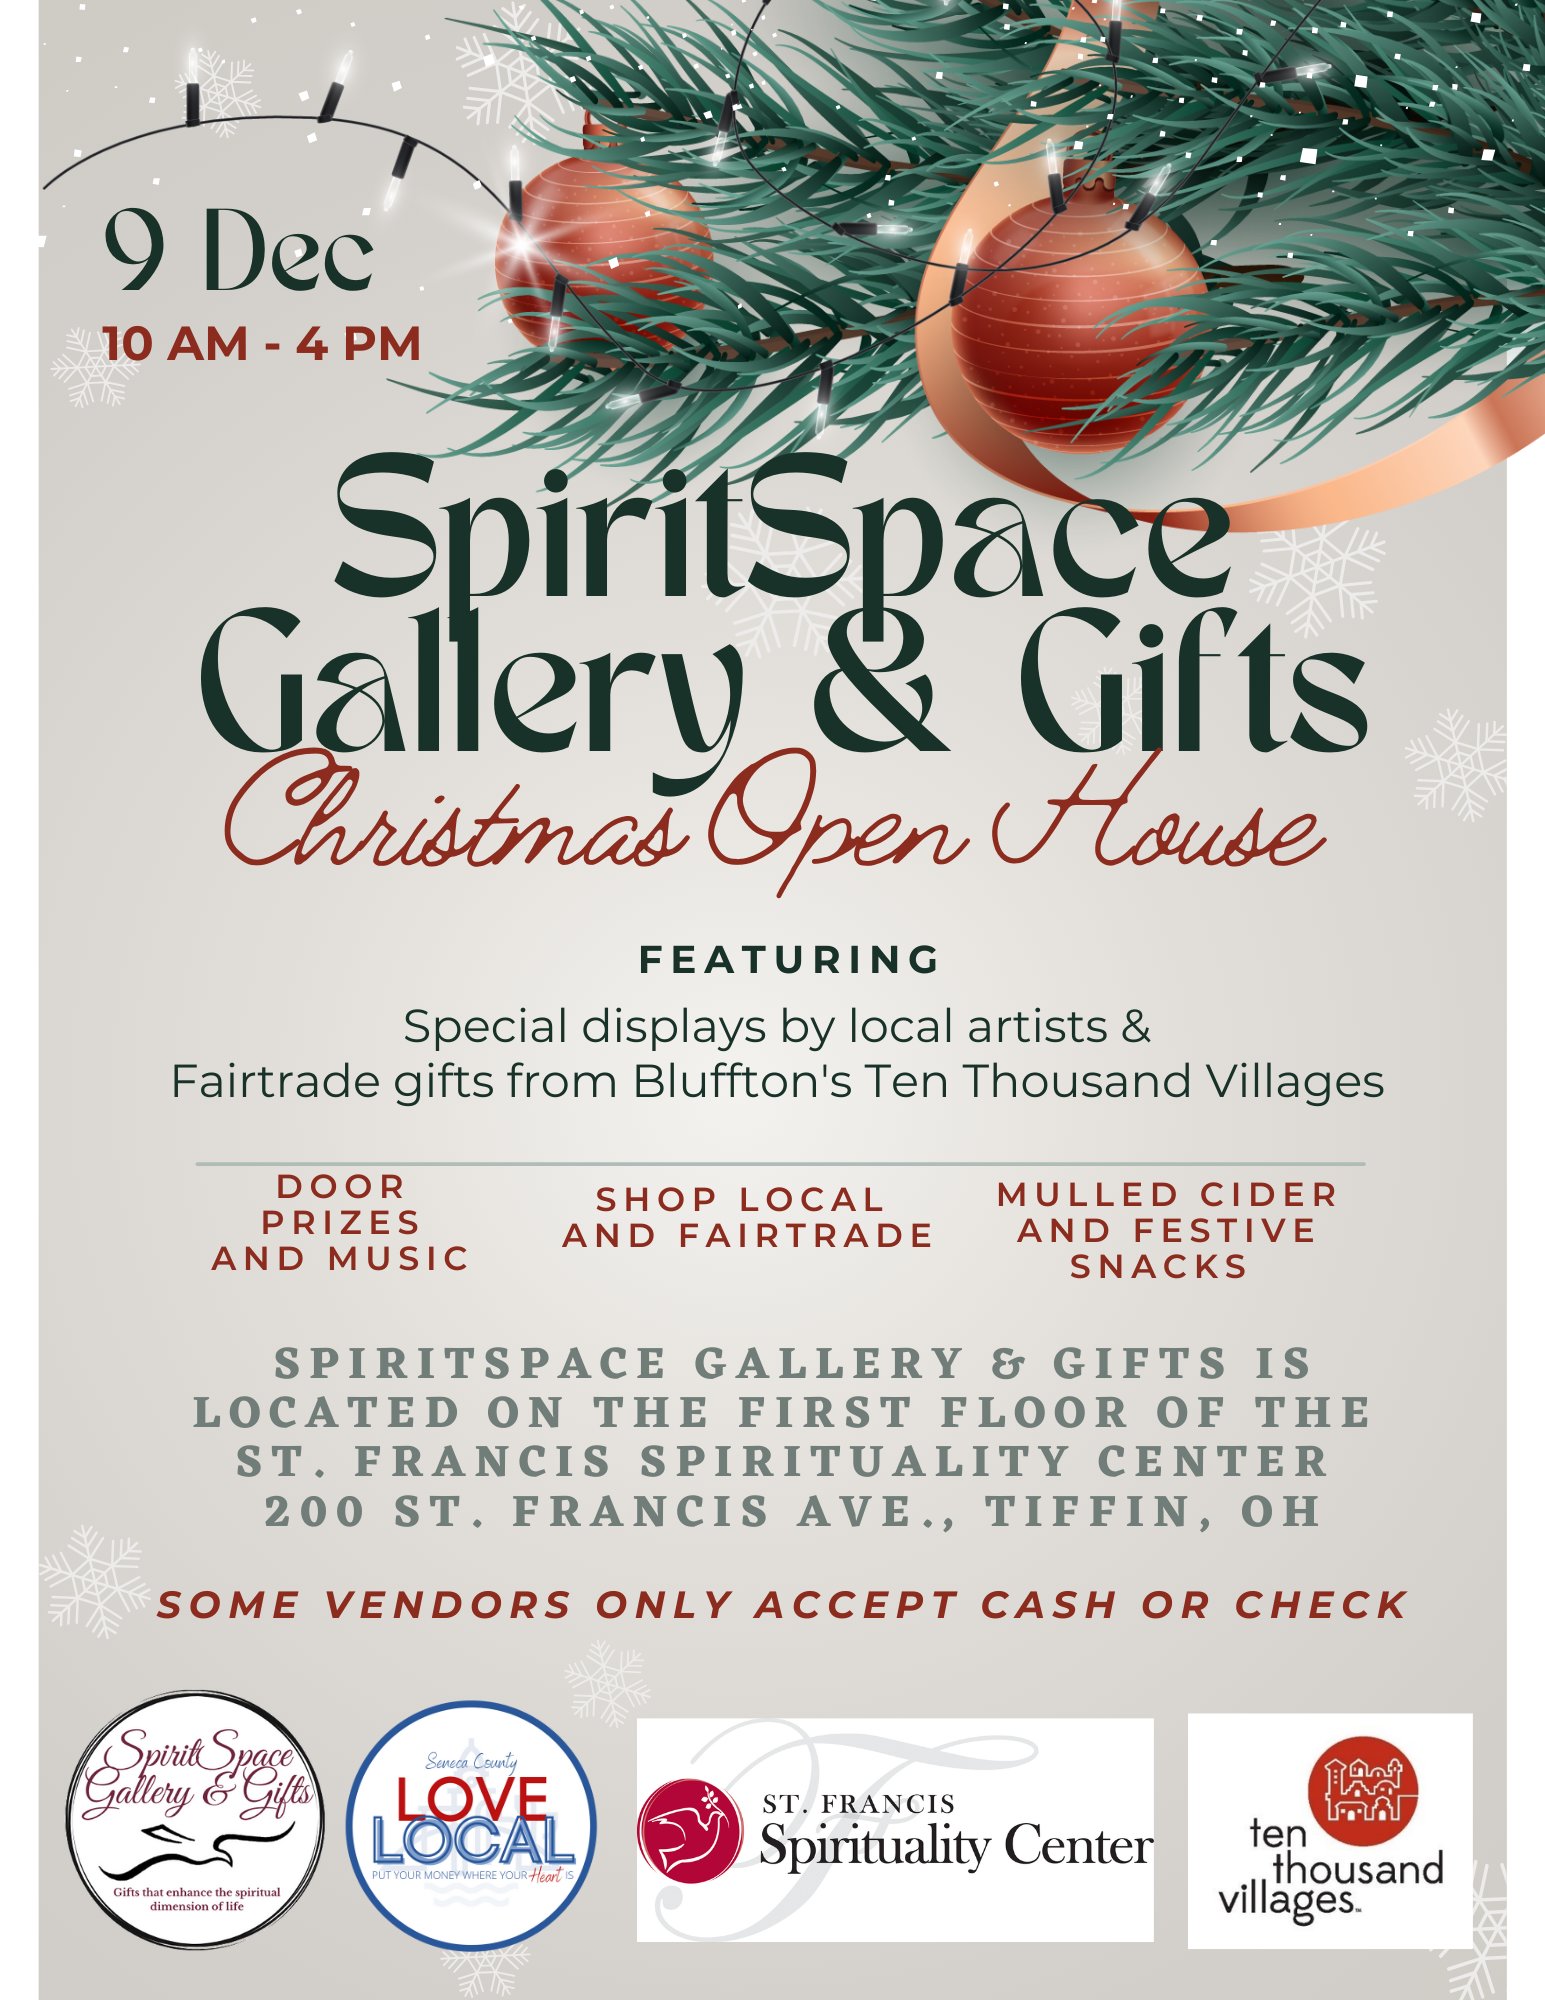 SpiritSpace Gallery & Gifts Christmas Open House